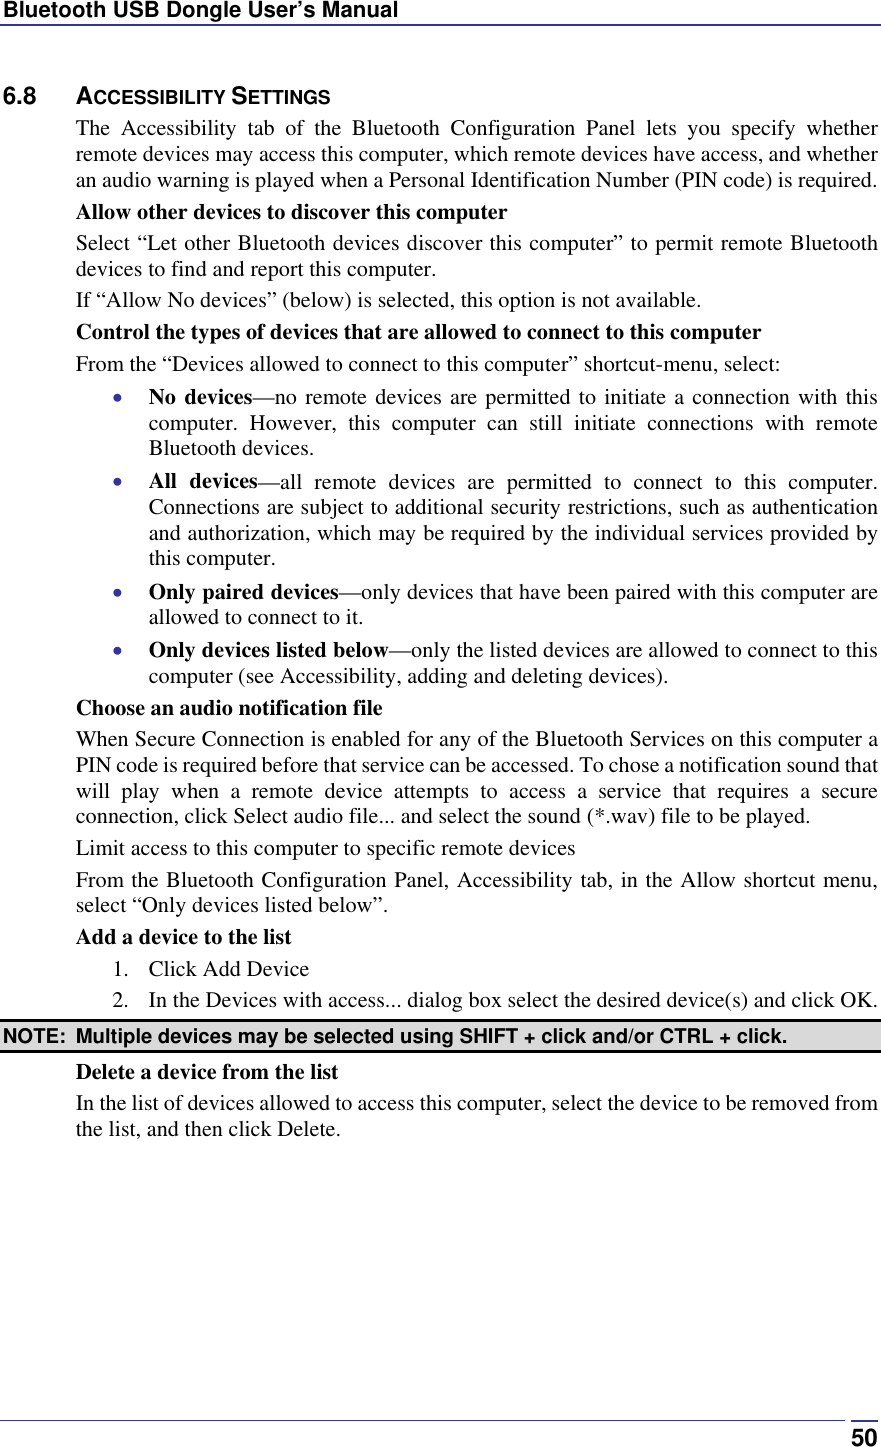 Bluetooth USB Dongle User’s Manual  506.8 ACCESSIBILITY SETTINGS The Accessibility tab of the Bluetooth Configuration Panel lets you specify whether remote devices may access this computer, which remote devices have access, and whether an audio warning is played when a Personal Identification Number (PIN code) is required. Allow other devices to discover this computer Select “Let other Bluetooth devices discover this computer” to permit remote Bluetooth devices to find and report this computer. If “Allow No devices” (below) is selected, this option is not available. Control the types of devices that are allowed to connect to this computer From the “Devices allowed to connect to this computer” shortcut-menu, select: •  No devices—no remote devices are permitted to initiate a connection with this computer. However, this computer can still initiate connections with remote Bluetooth devices. •  All devices—all remote devices are permitted to connect to this computer. Connections are subject to additional security restrictions, such as authentication and authorization, which may be required by the individual services provided by this computer. •  Only paired devices—only devices that have been paired with this computer are allowed to connect to it. •  Only devices listed below—only the listed devices are allowed to connect to this computer (see Accessibility, adding and deleting devices). Choose an audio notification file When Secure Connection is enabled for any of the Bluetooth Services on this computer a PIN code is required before that service can be accessed. To chose a notification sound that will play when a remote device attempts to access a service that requires a secure connection, click Select audio file... and select the sound (*.wav) file to be played. Limit access to this computer to specific remote devices From the Bluetooth Configuration Panel, Accessibility tab, in the Allow shortcut menu, select “Only devices listed below”. Add a device to the list 1. Click Add Device 2.  In the Devices with access... dialog box select the desired device(s) and click OK.  NOTE:  Multiple devices may be selected using SHIFT + click and/or CTRL + click. Delete a device from the list In the list of devices allowed to access this computer, select the device to be removed from the list, and then click Delete.  